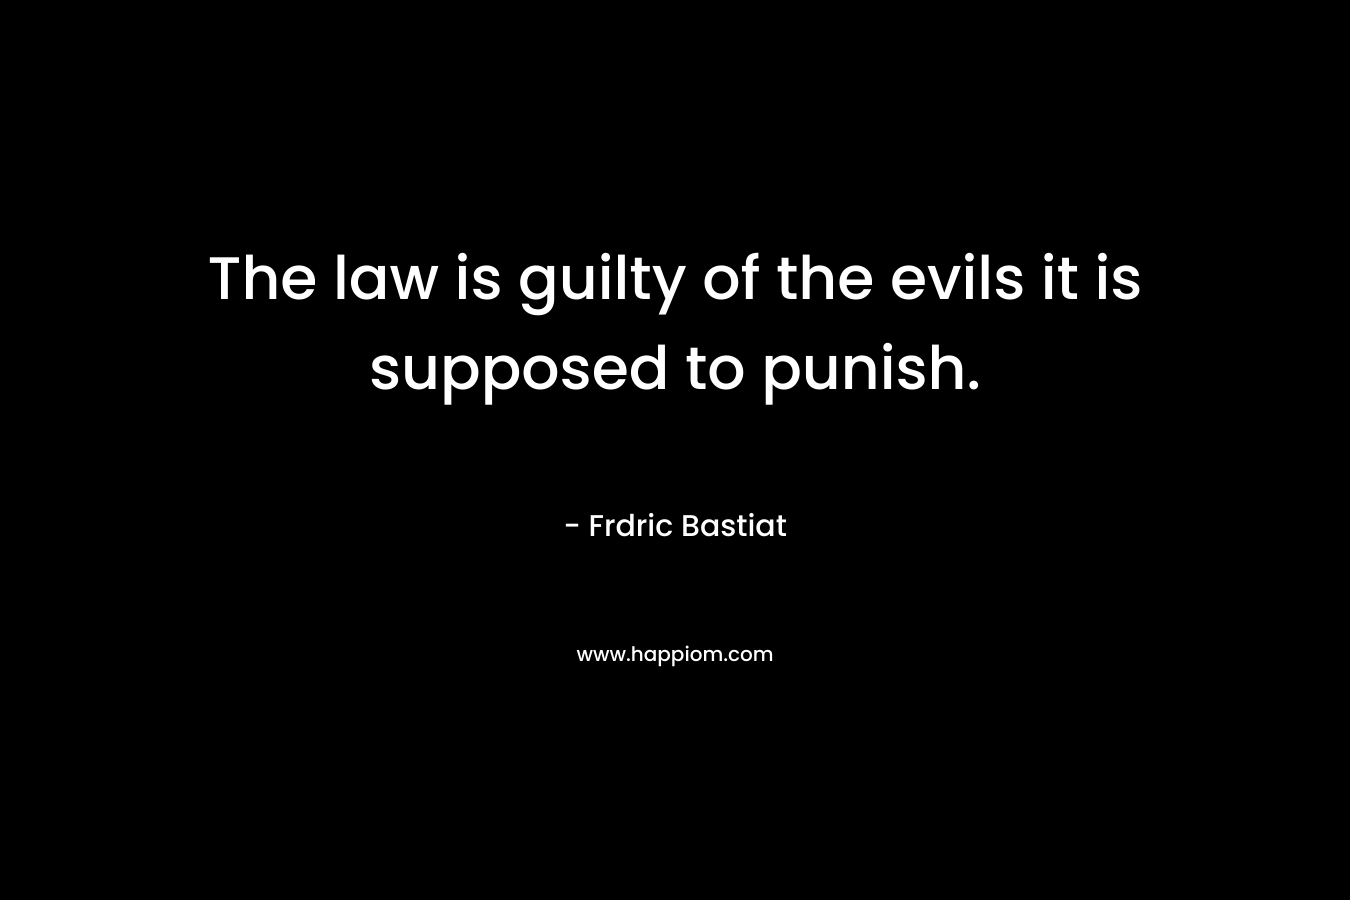 The law is guilty of the evils it is supposed to punish. – Frdric Bastiat